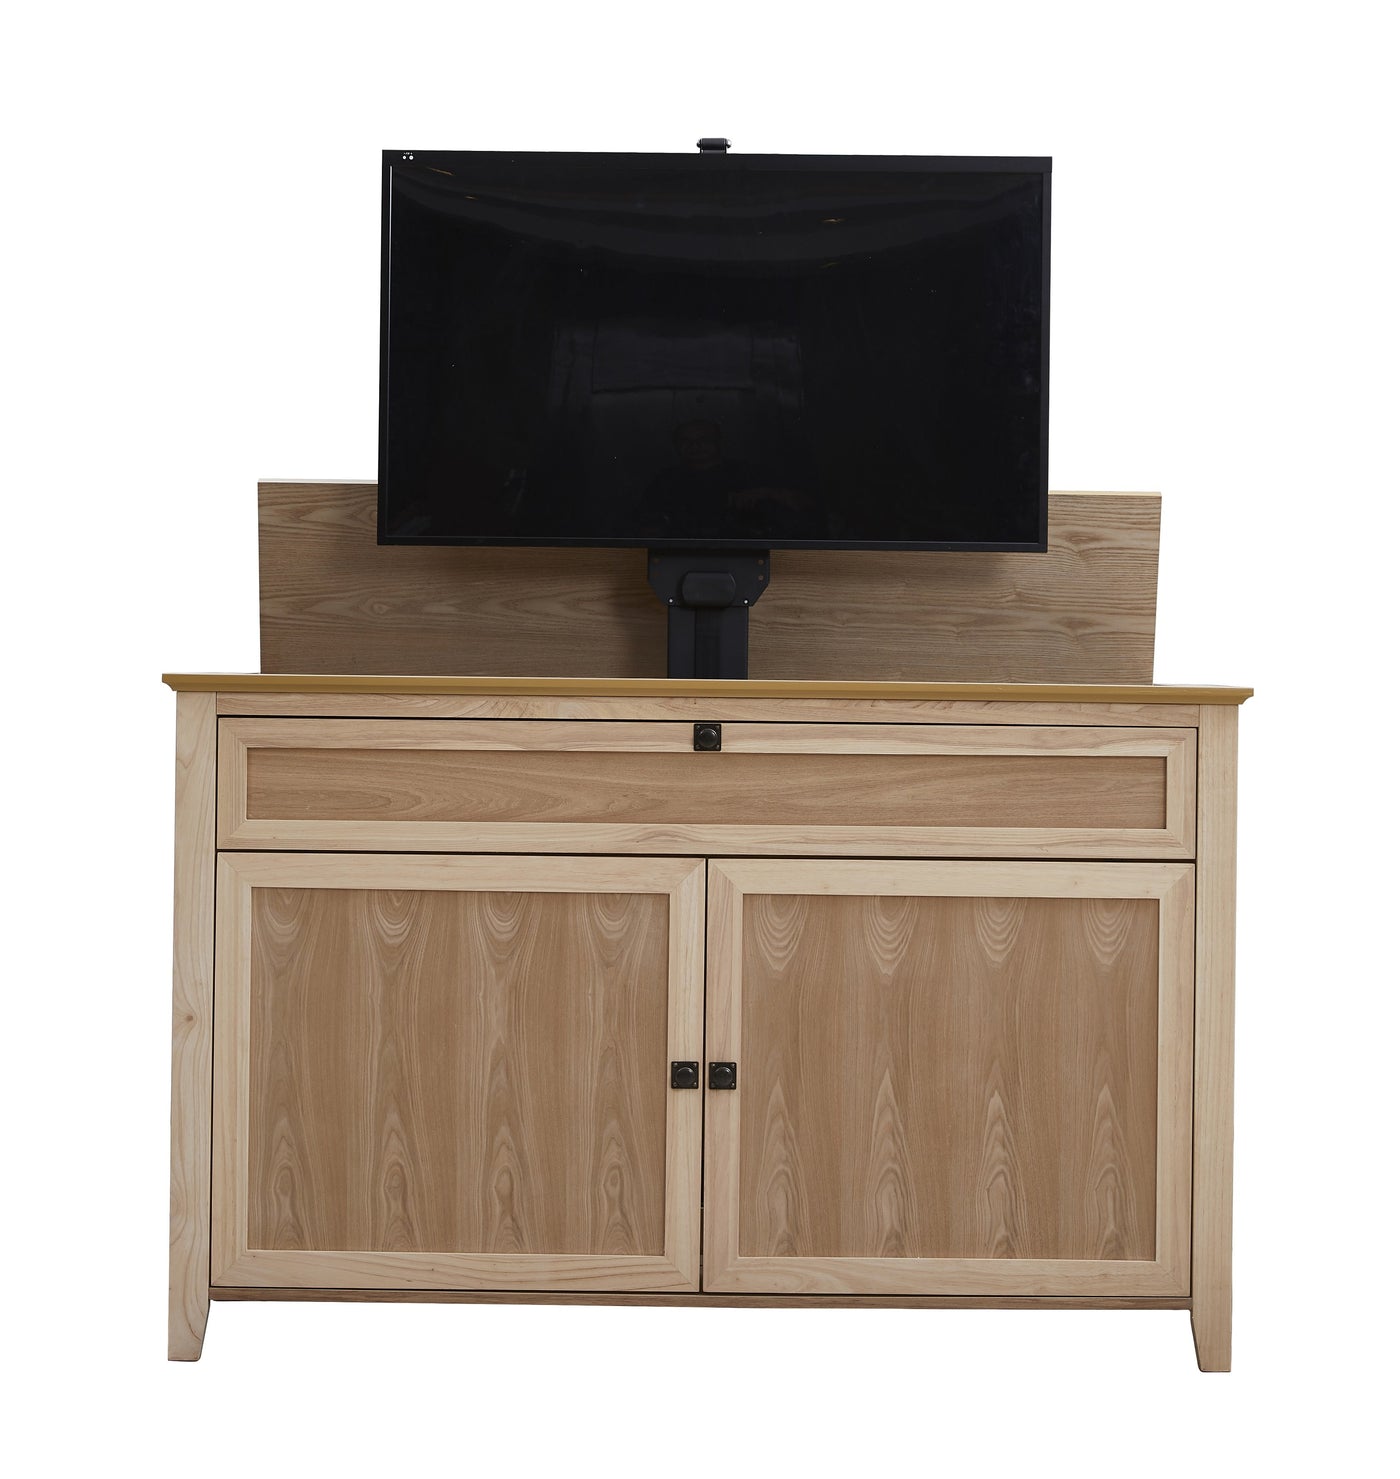 Touchstone The Claymont Unfinished 70163 TV Lift Cabinet for 65" Flat screen TVs - TS-70163 - Avanquil